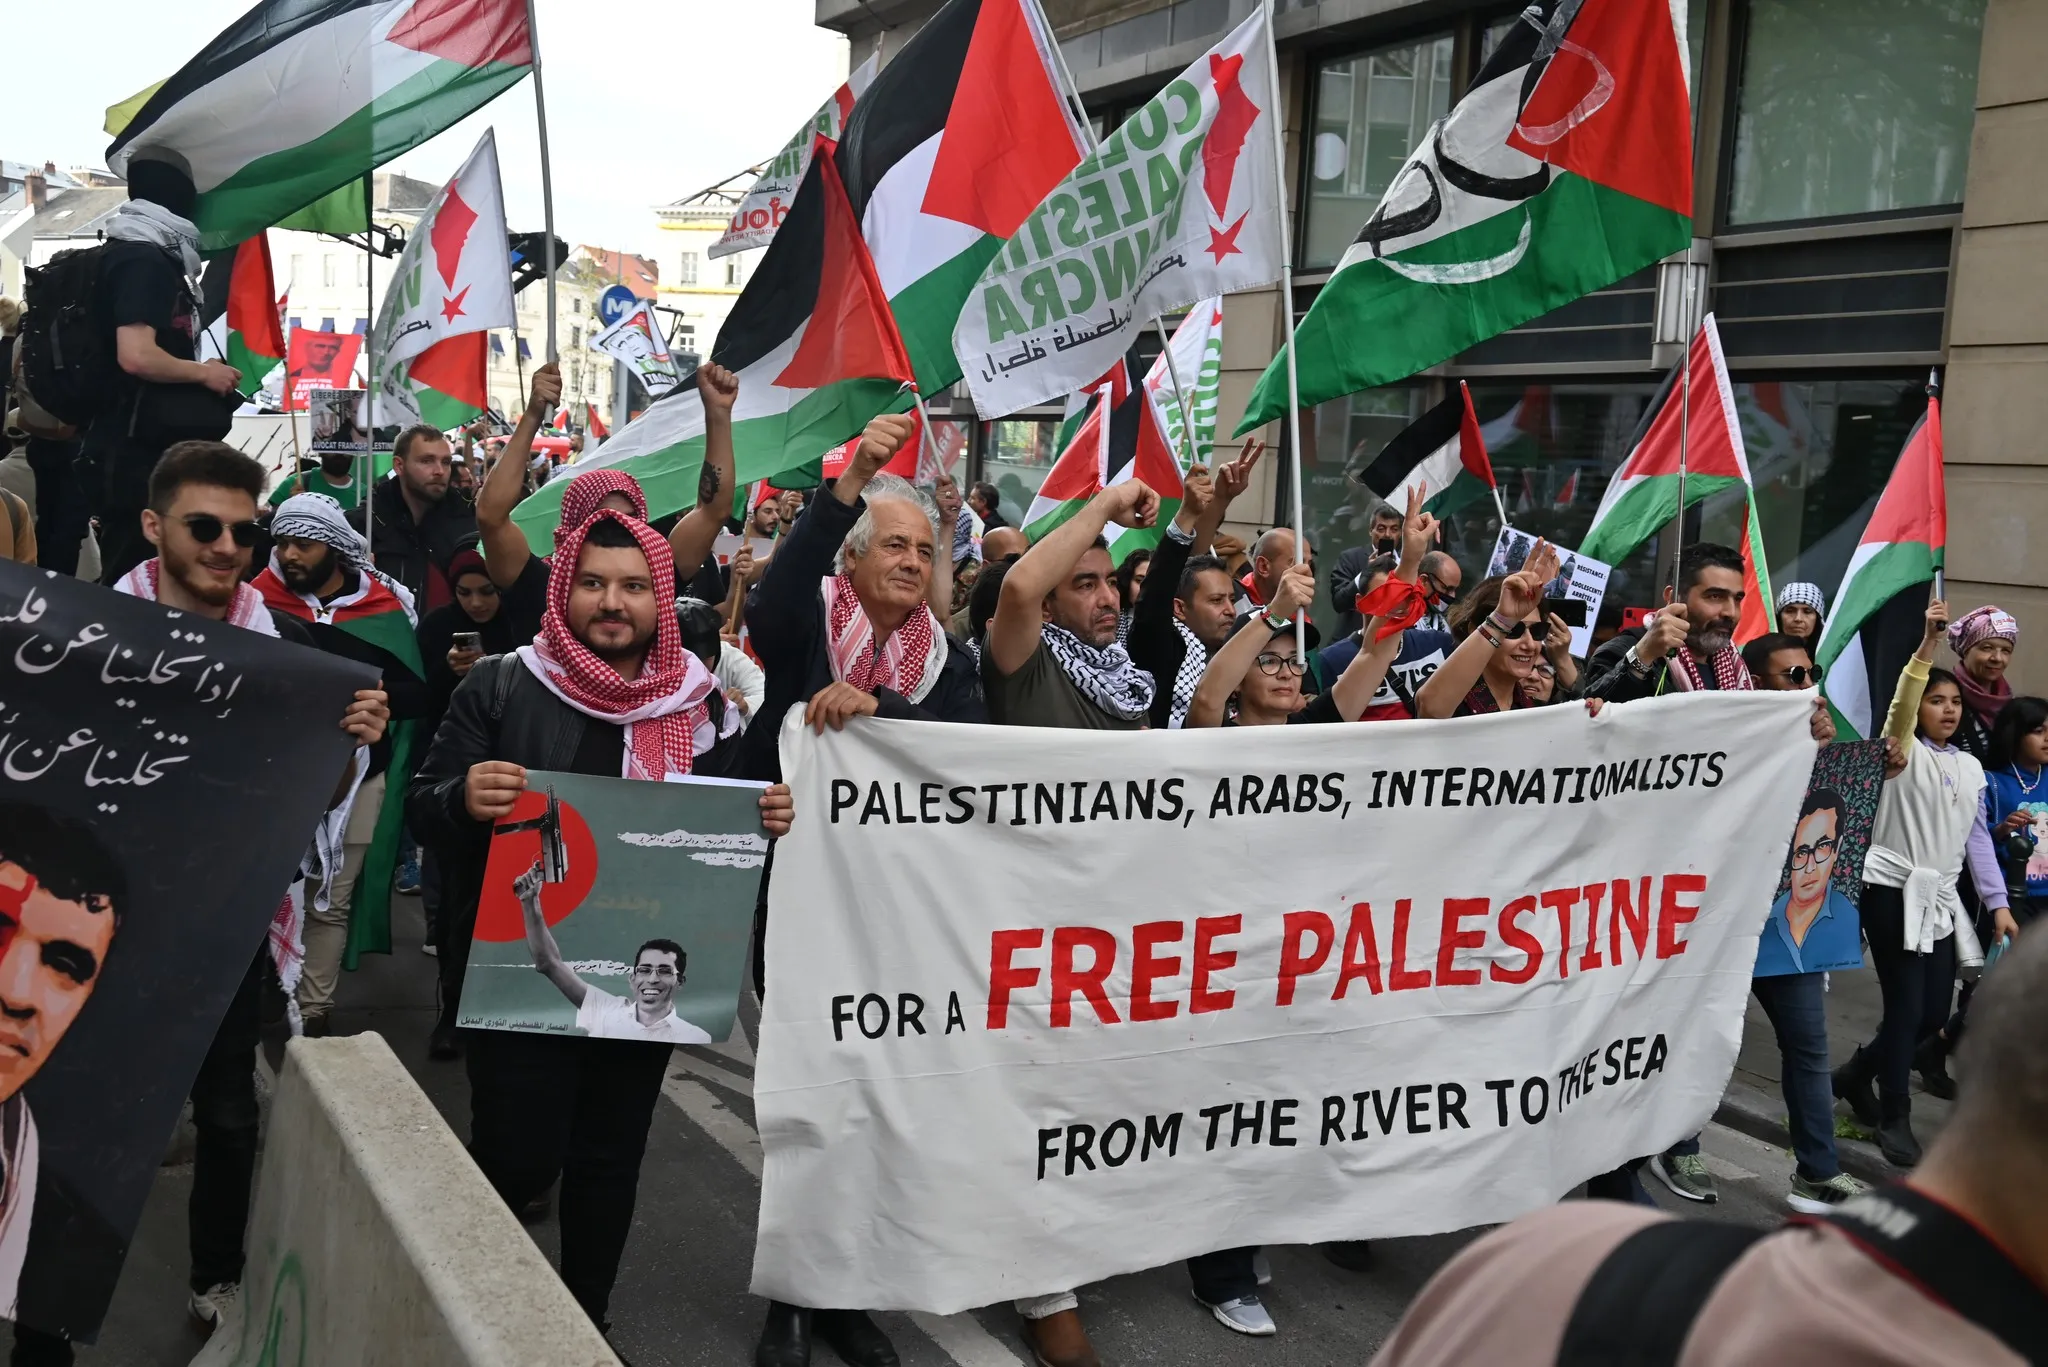 People marching and holding a sign that says "Free Palestine". Photo: Samidoun.